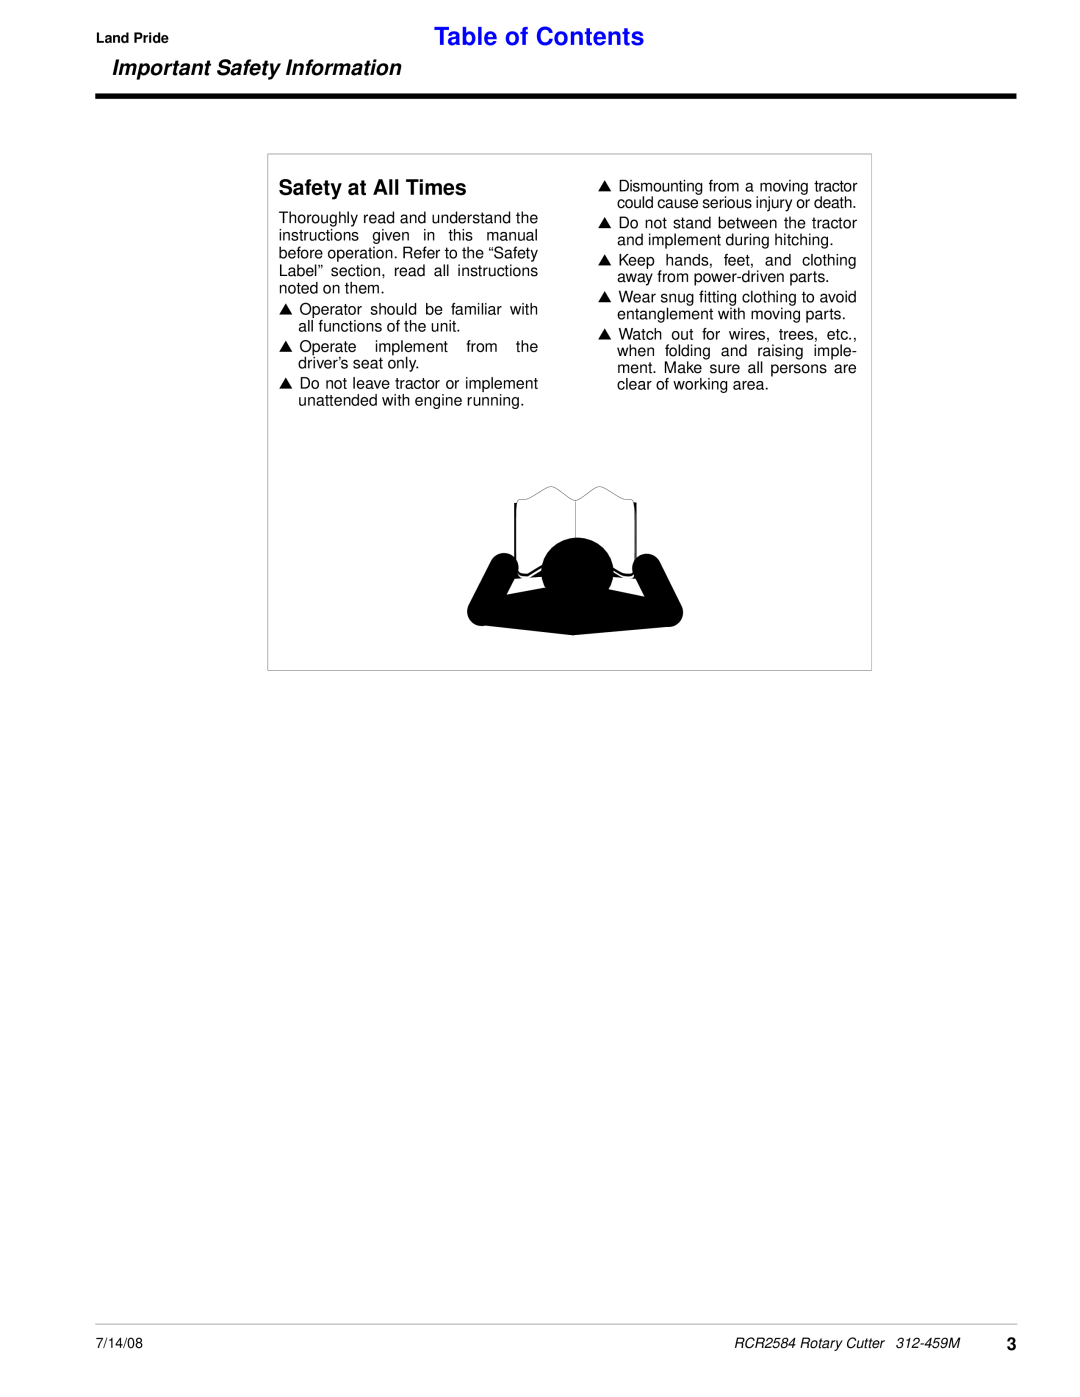 Land Pride RCR2584 manual Table of Contents, Safety at All Times, Important Safety Information 